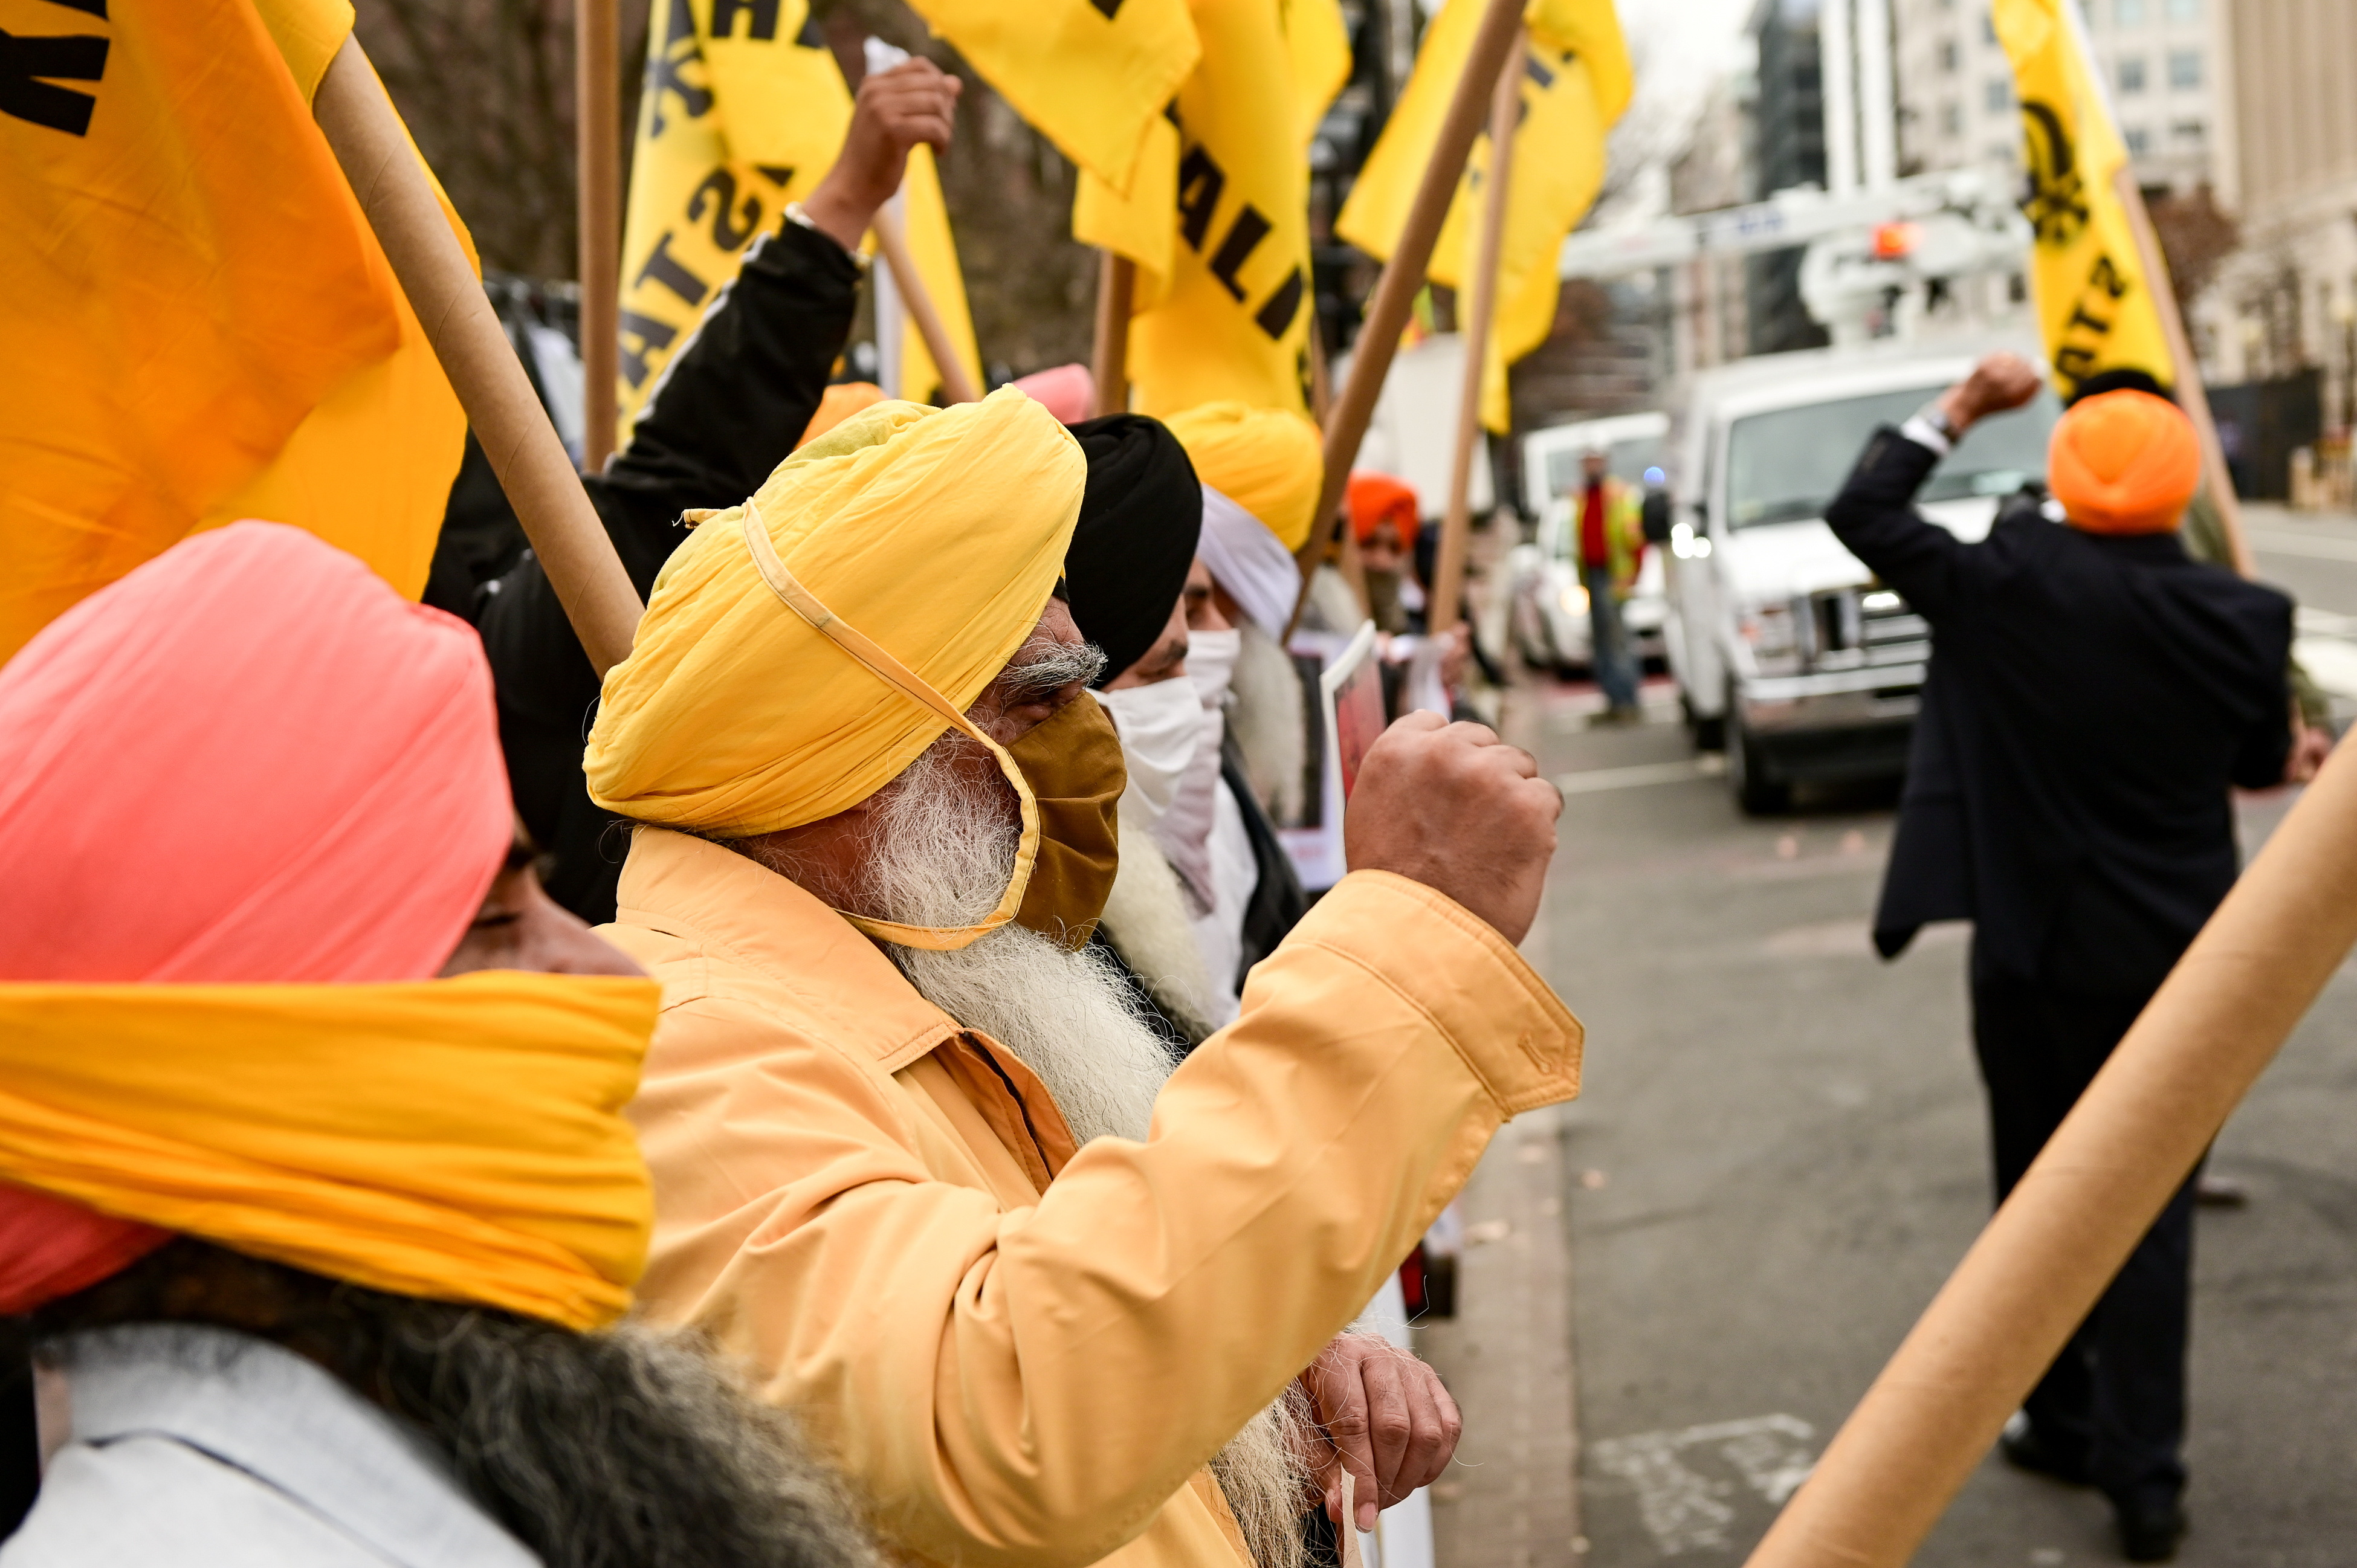 Protesters with the group Sikhs For Justice demonstrate against the Indian government's treatment of Sikh farmers near the White House in Washington